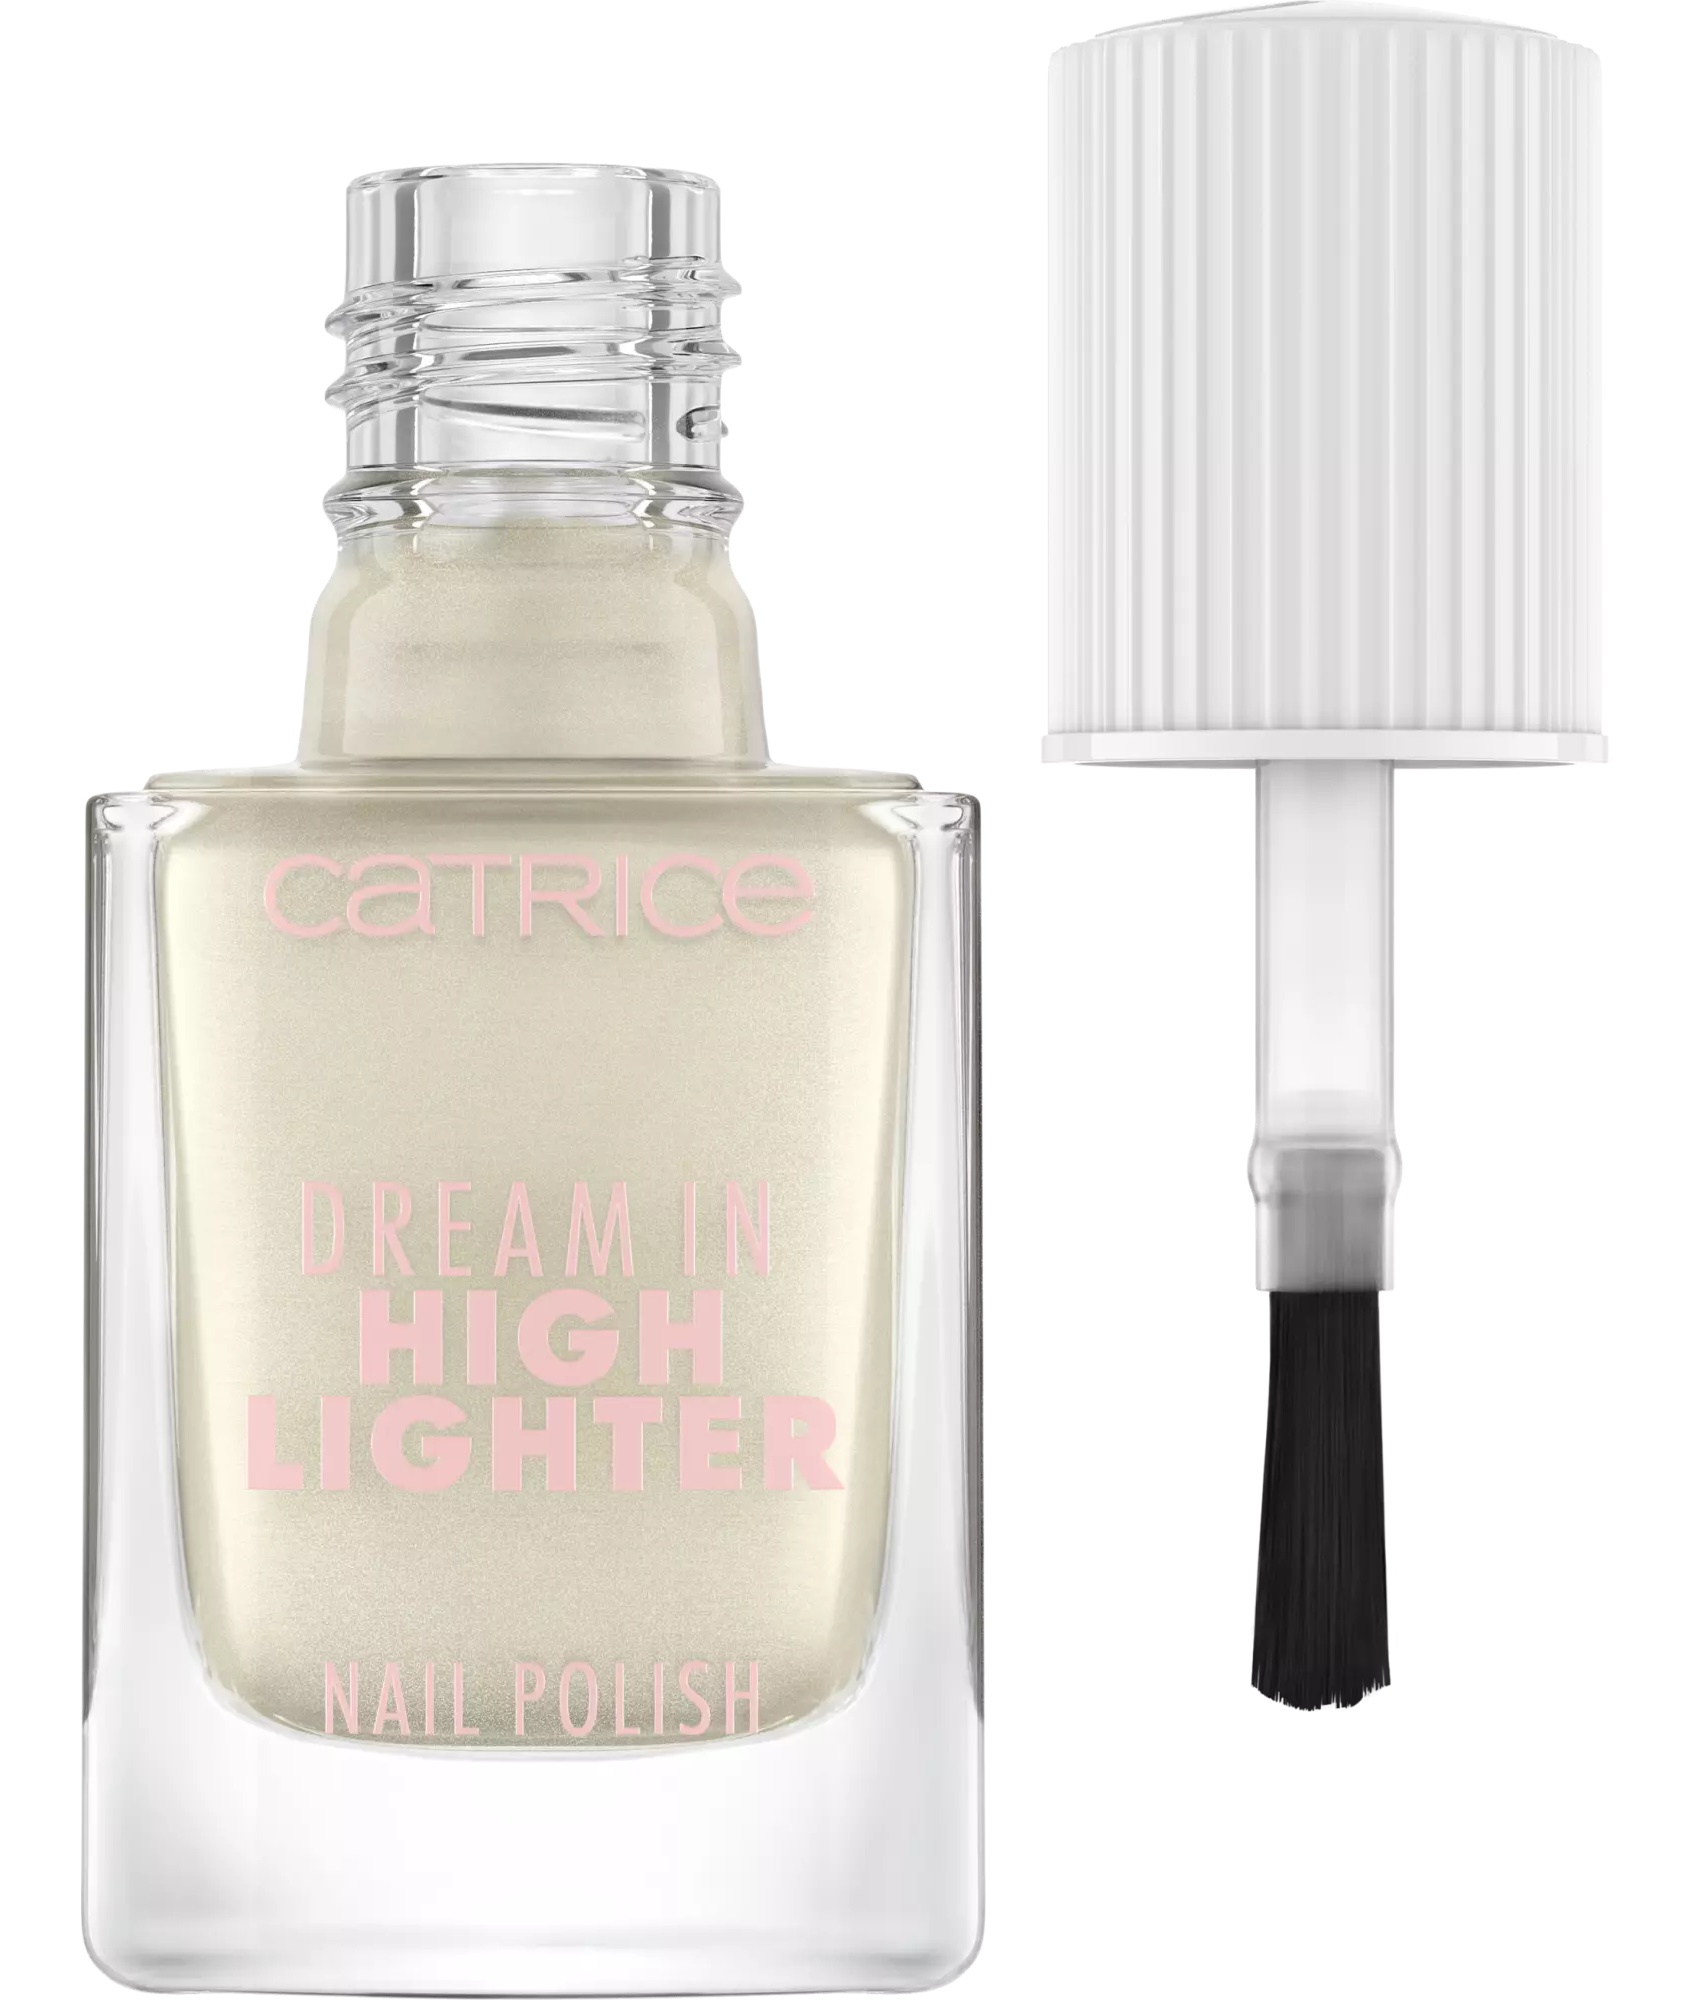 Catrice Dream In Highlighter Nail Polish